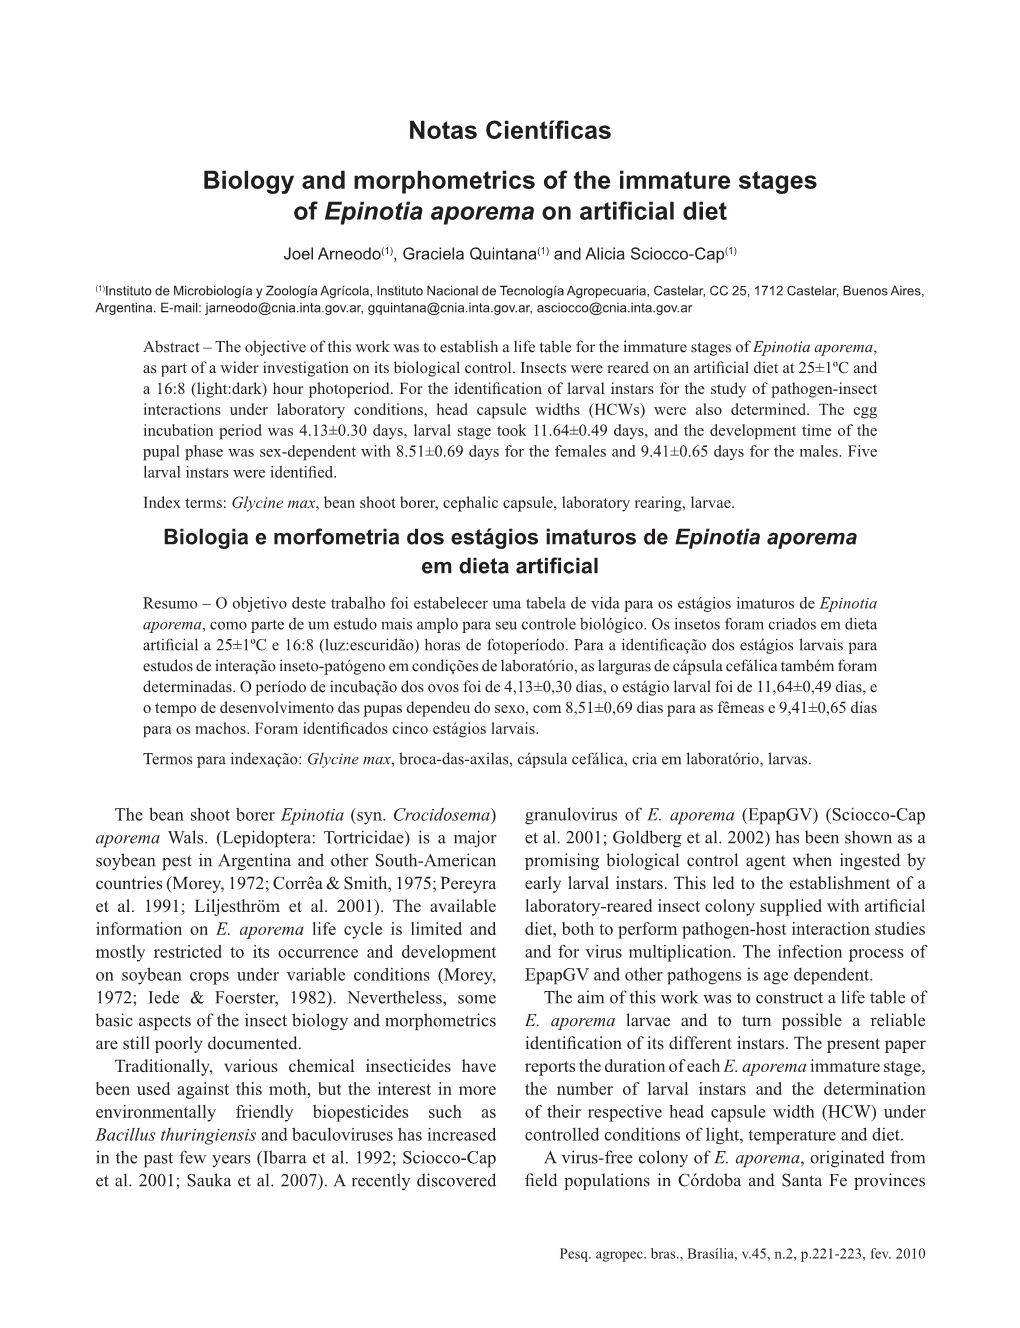 Notas Científicas Biology and Morphometrics of the Immature Stages of Epinotia Aporema on Artificial Diet